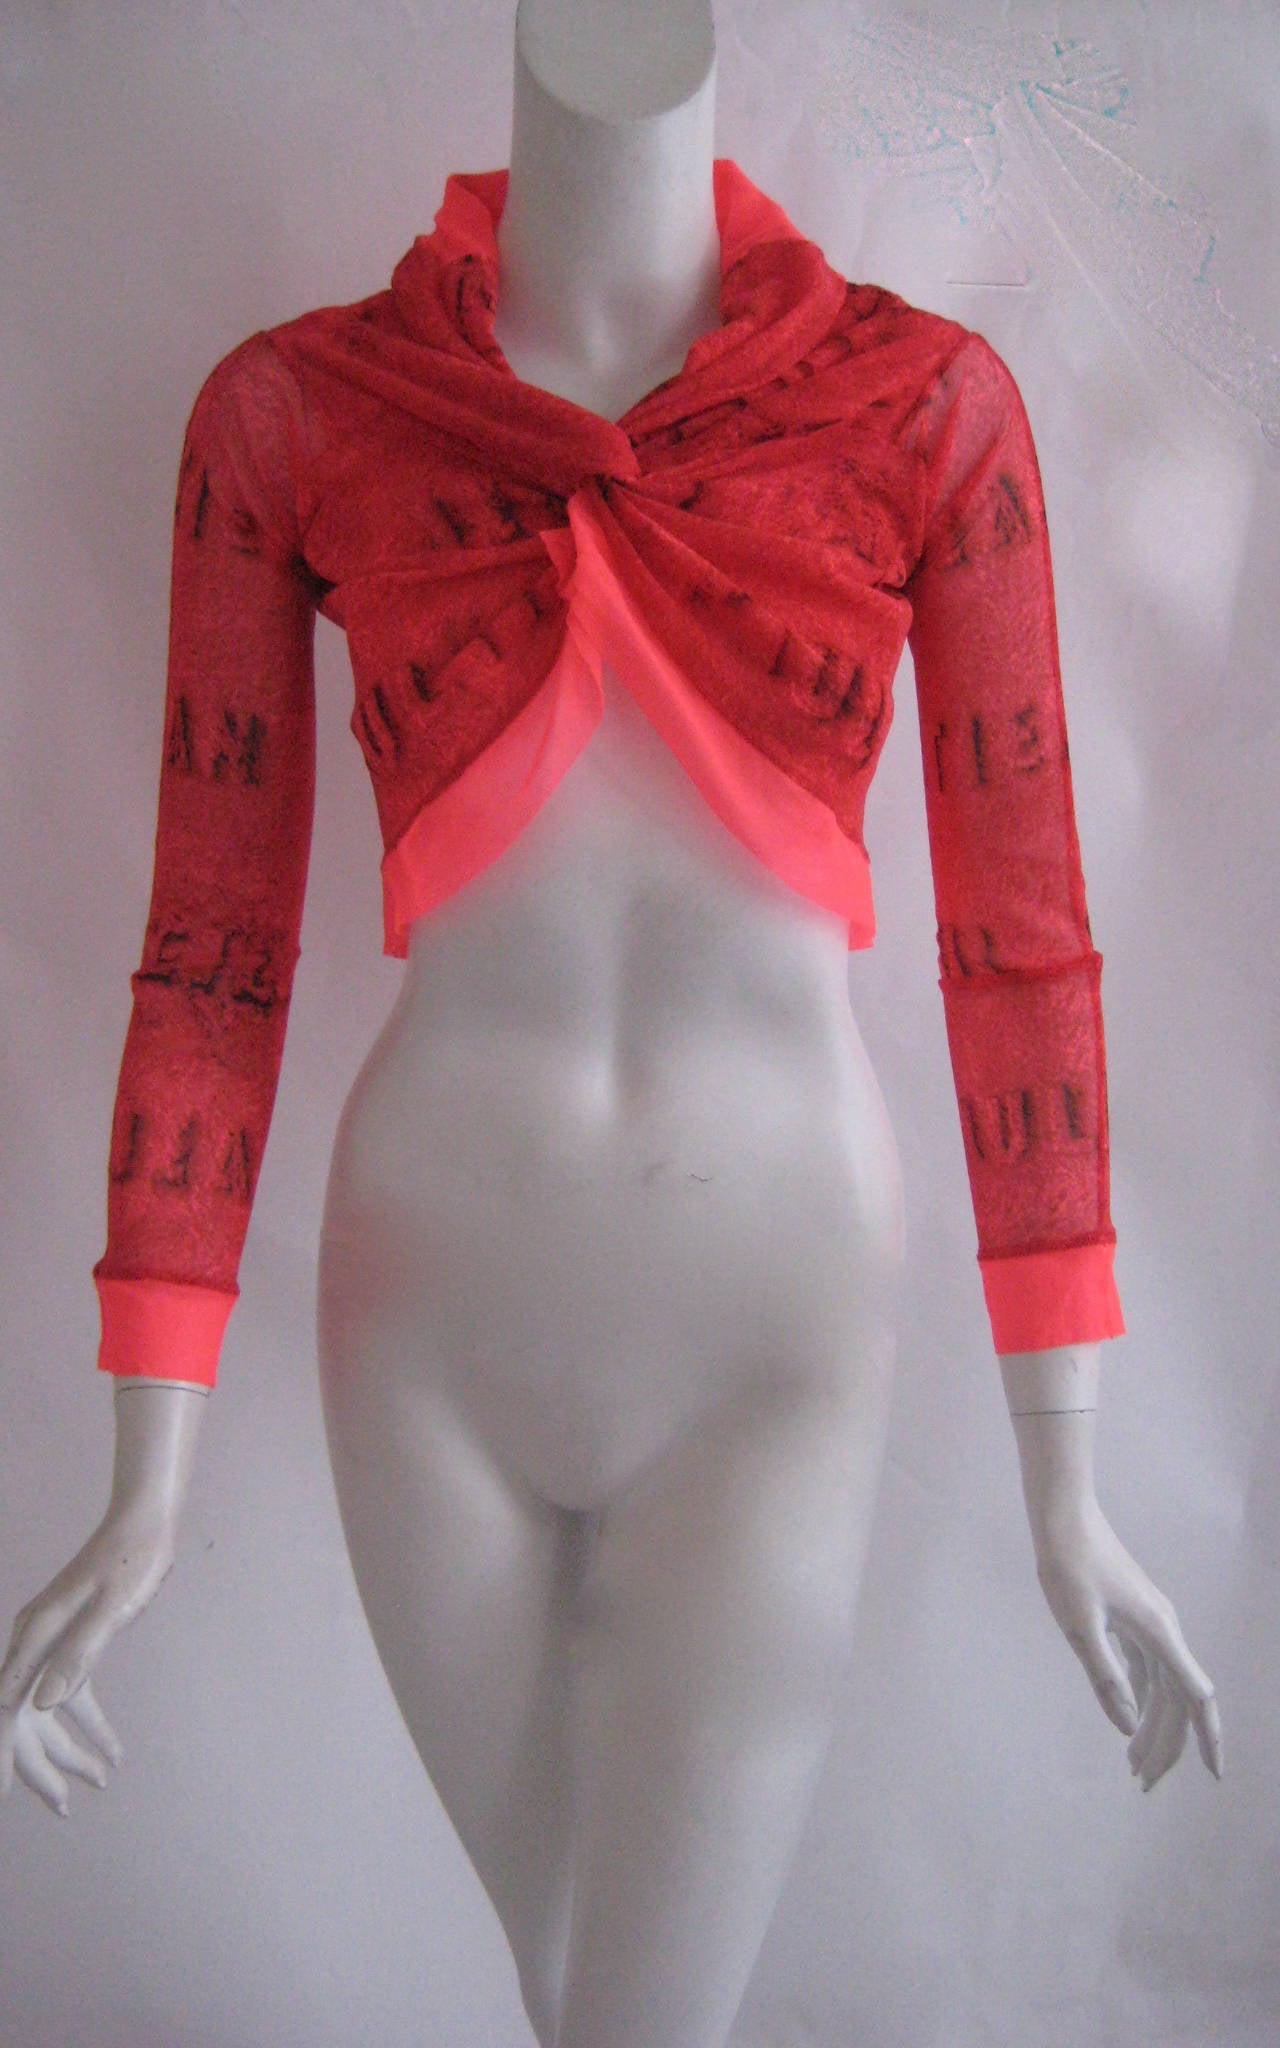 Jean Paul Gaultier printed sheer mesh top
Labeled size Large but shown on a size 6 mannequin